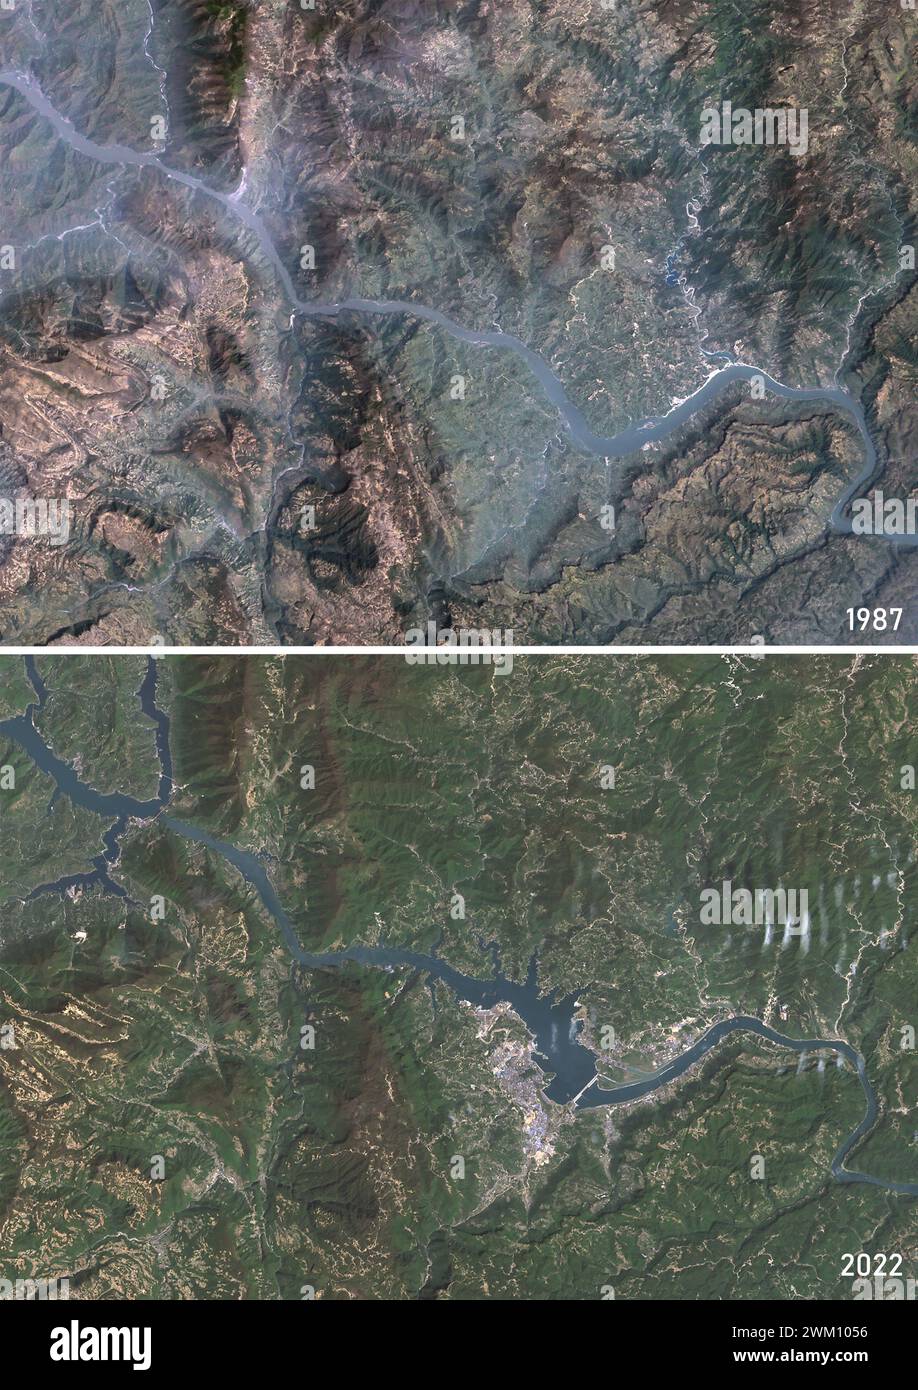 Color satellite image of the Yangtze River in 1987 and 2022, before and after the construction of the Three Gorges Dam. The dam is located in the Hubei province in central China. Stock Photo